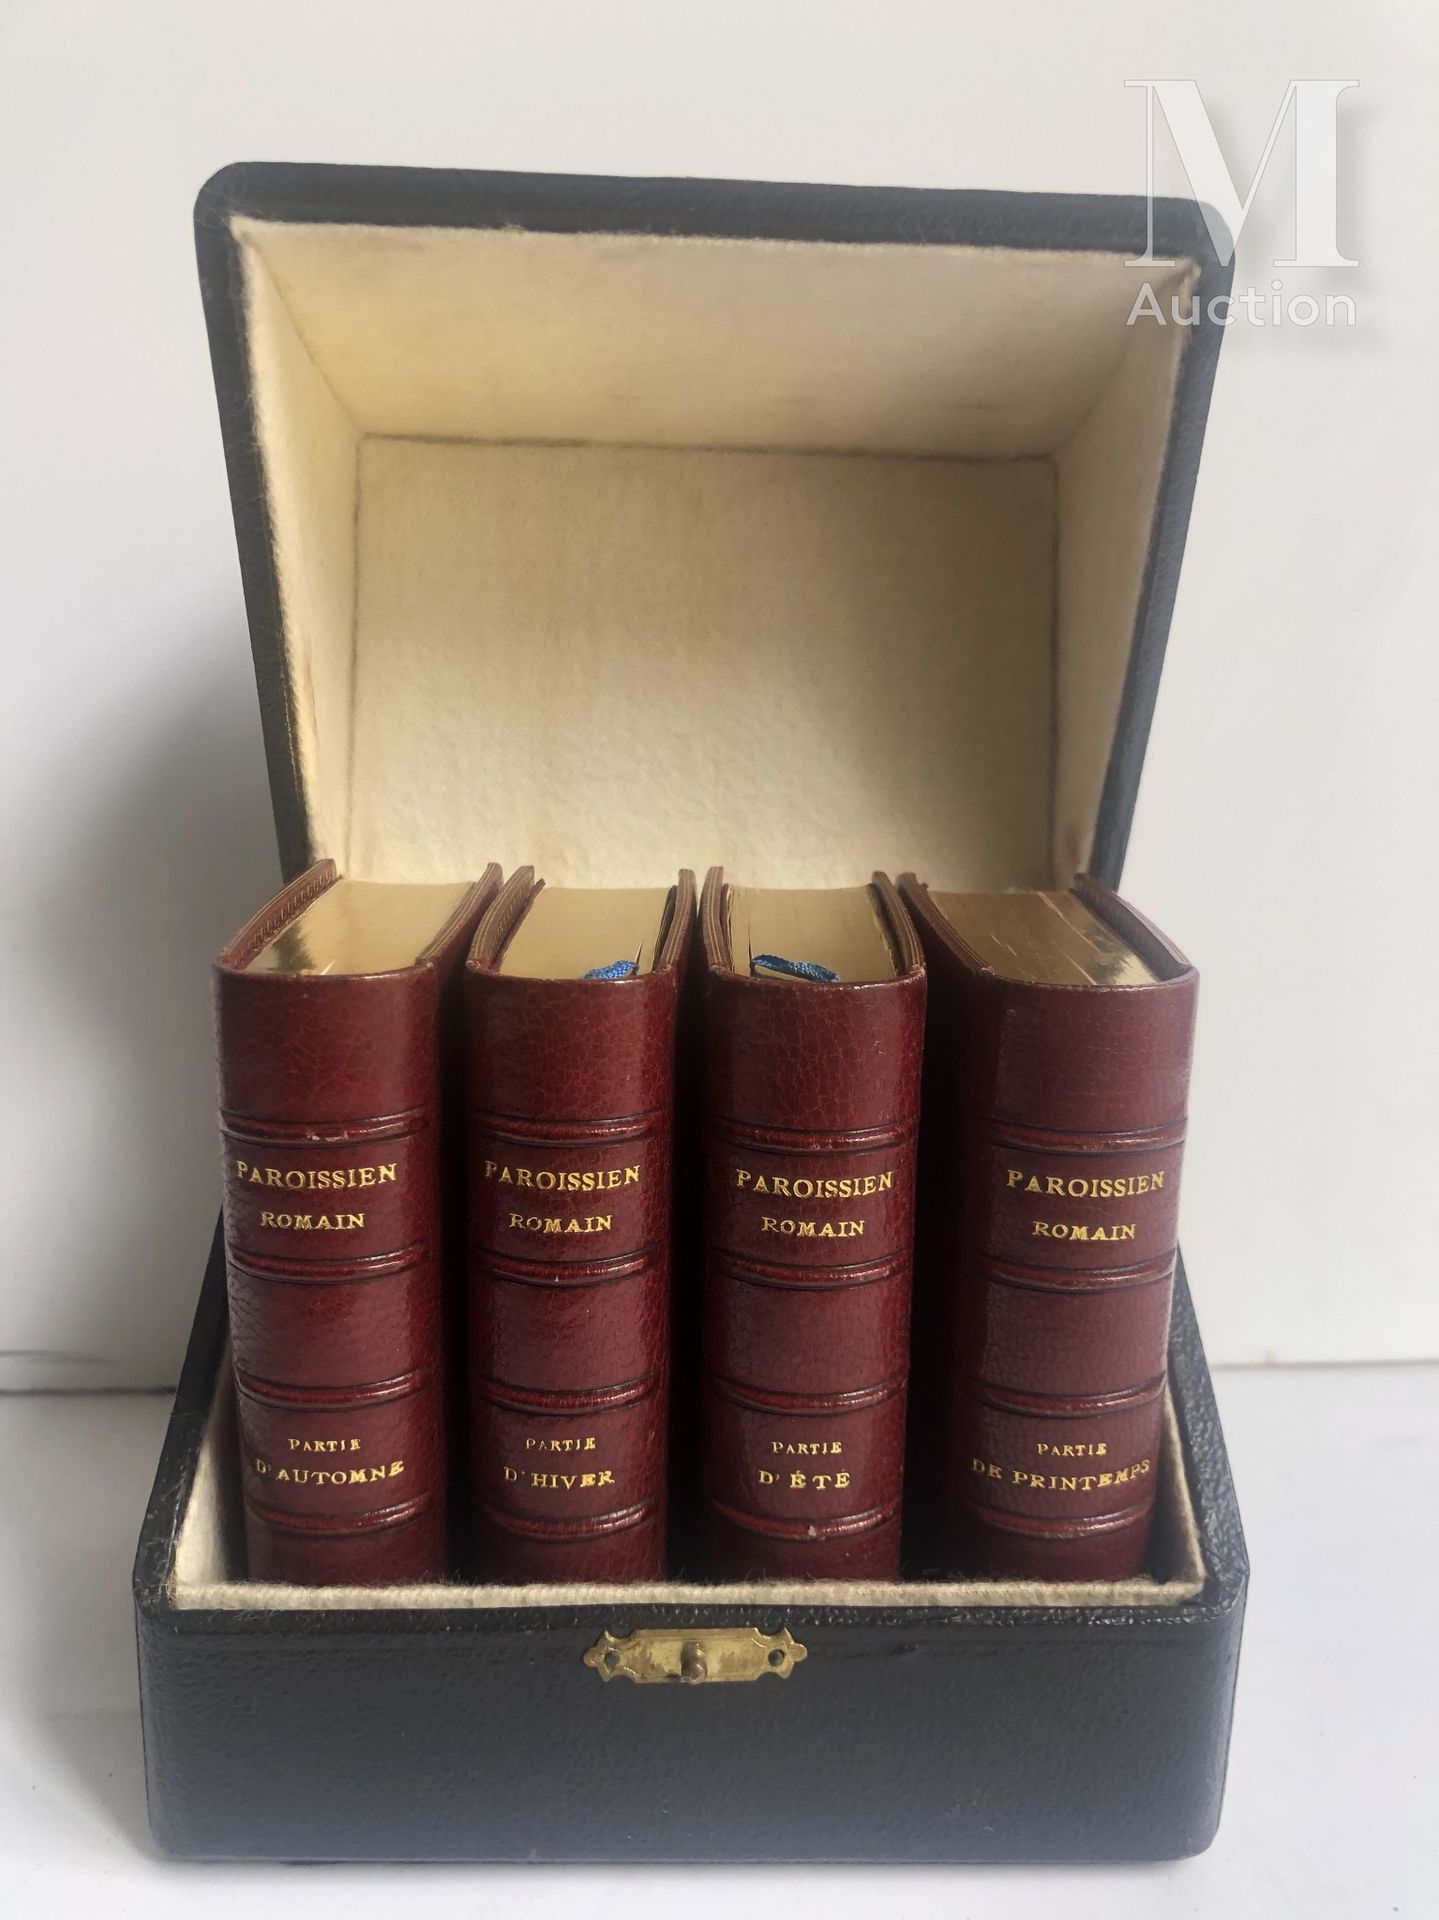 Paroissien Romain in four volumes bound in full burgundy morocco

With the numbe&hellip;